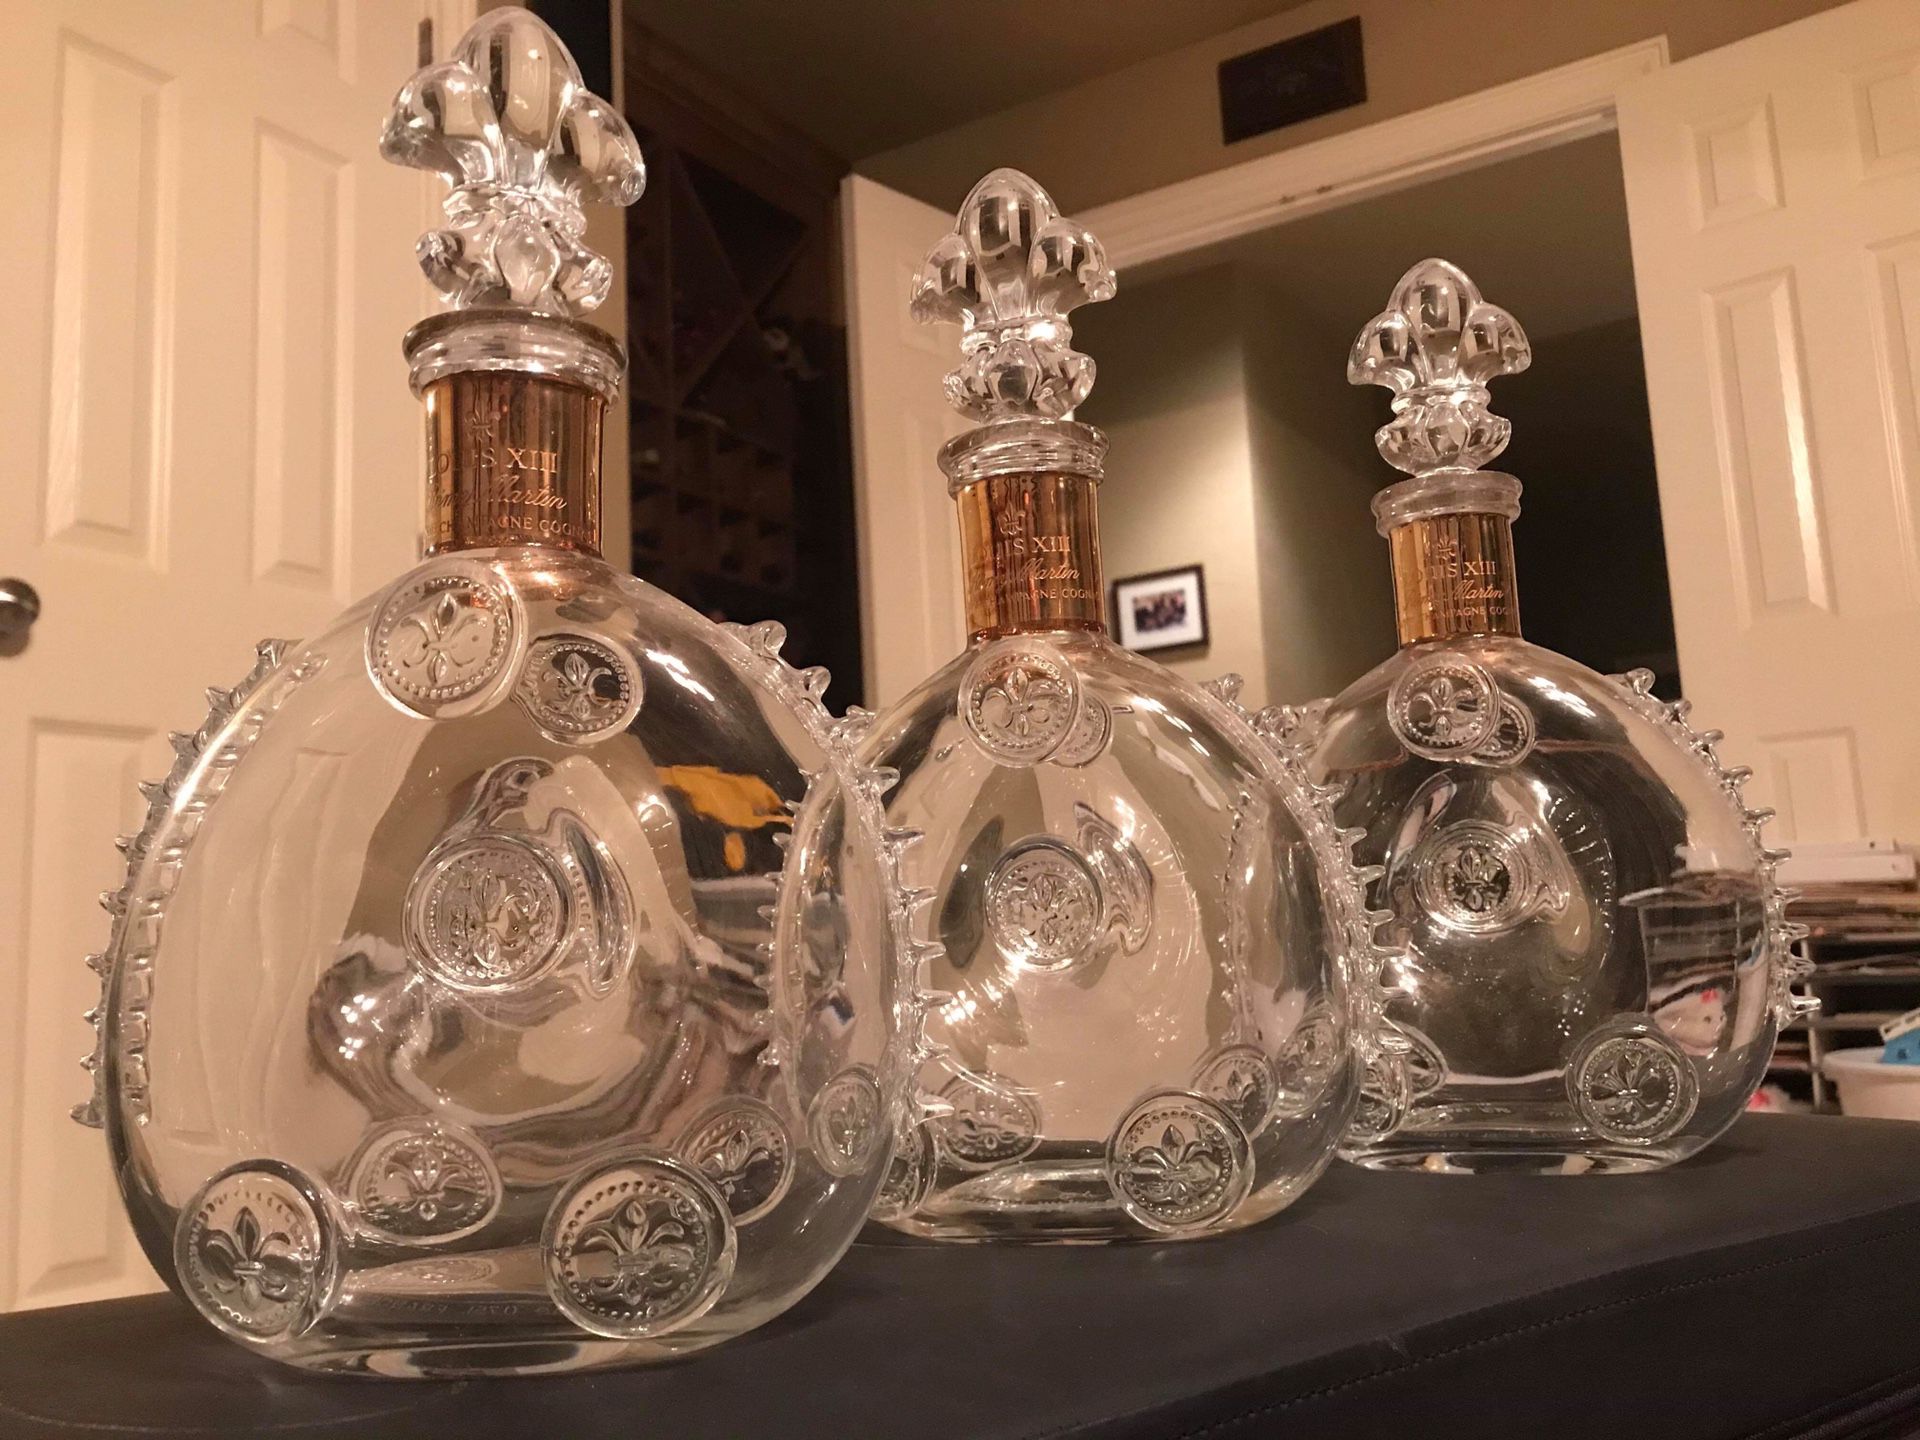 Remy Martin Louis XIII cognac Baccarat crystal decanters for Sale in  Edmond, OK - OfferUp